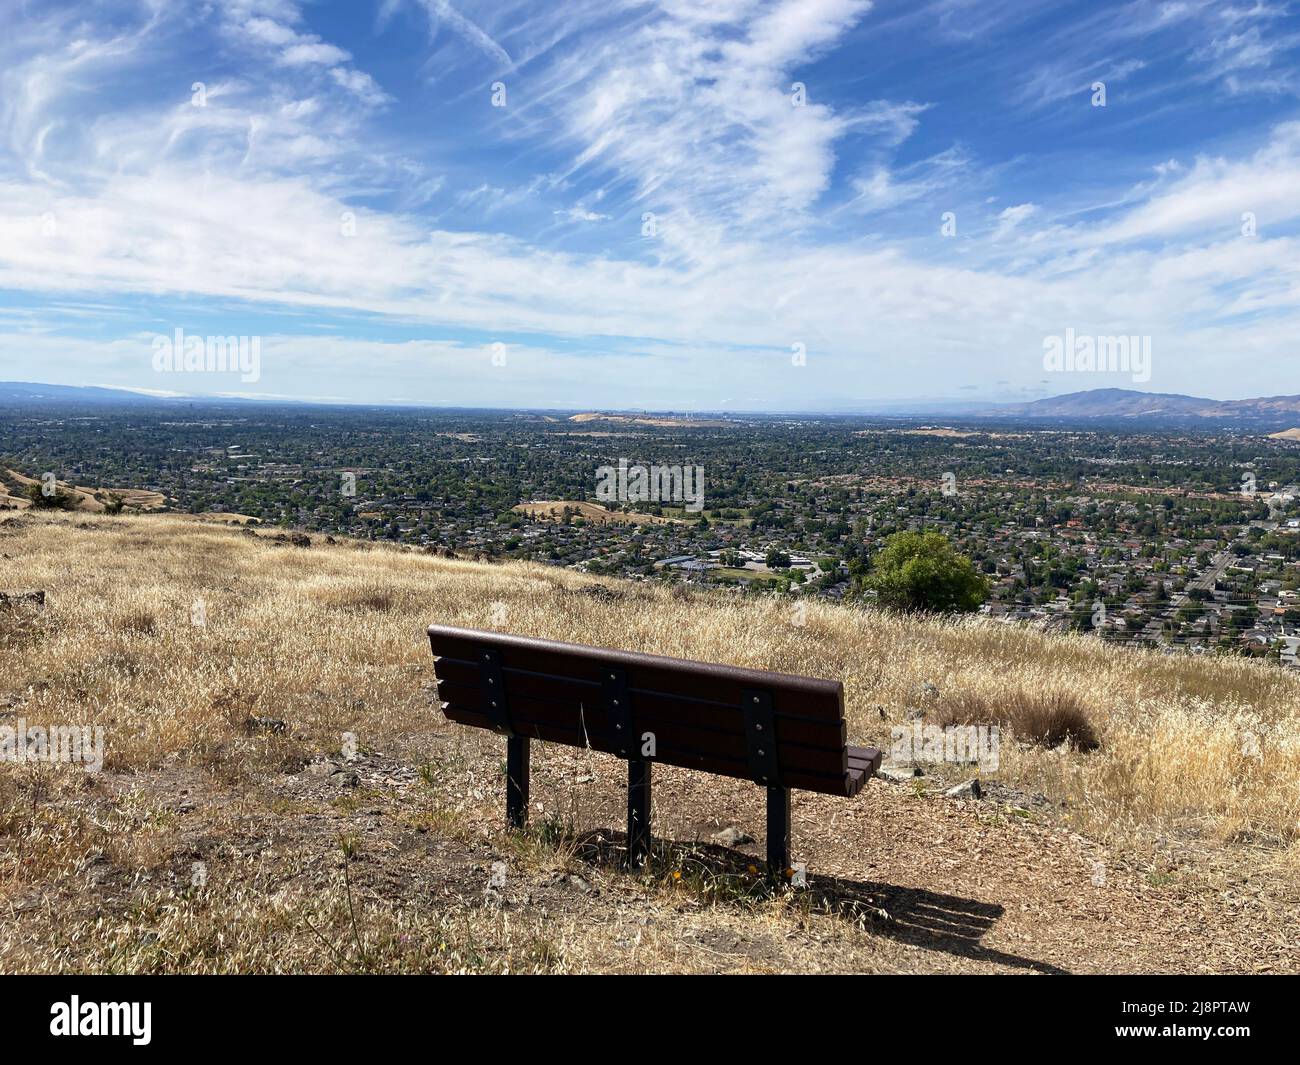 Bench with scenic aerial view of Silicon Valley residential neighborhood from Bernal Hill in Santa Teresa County Park. Stock Photo